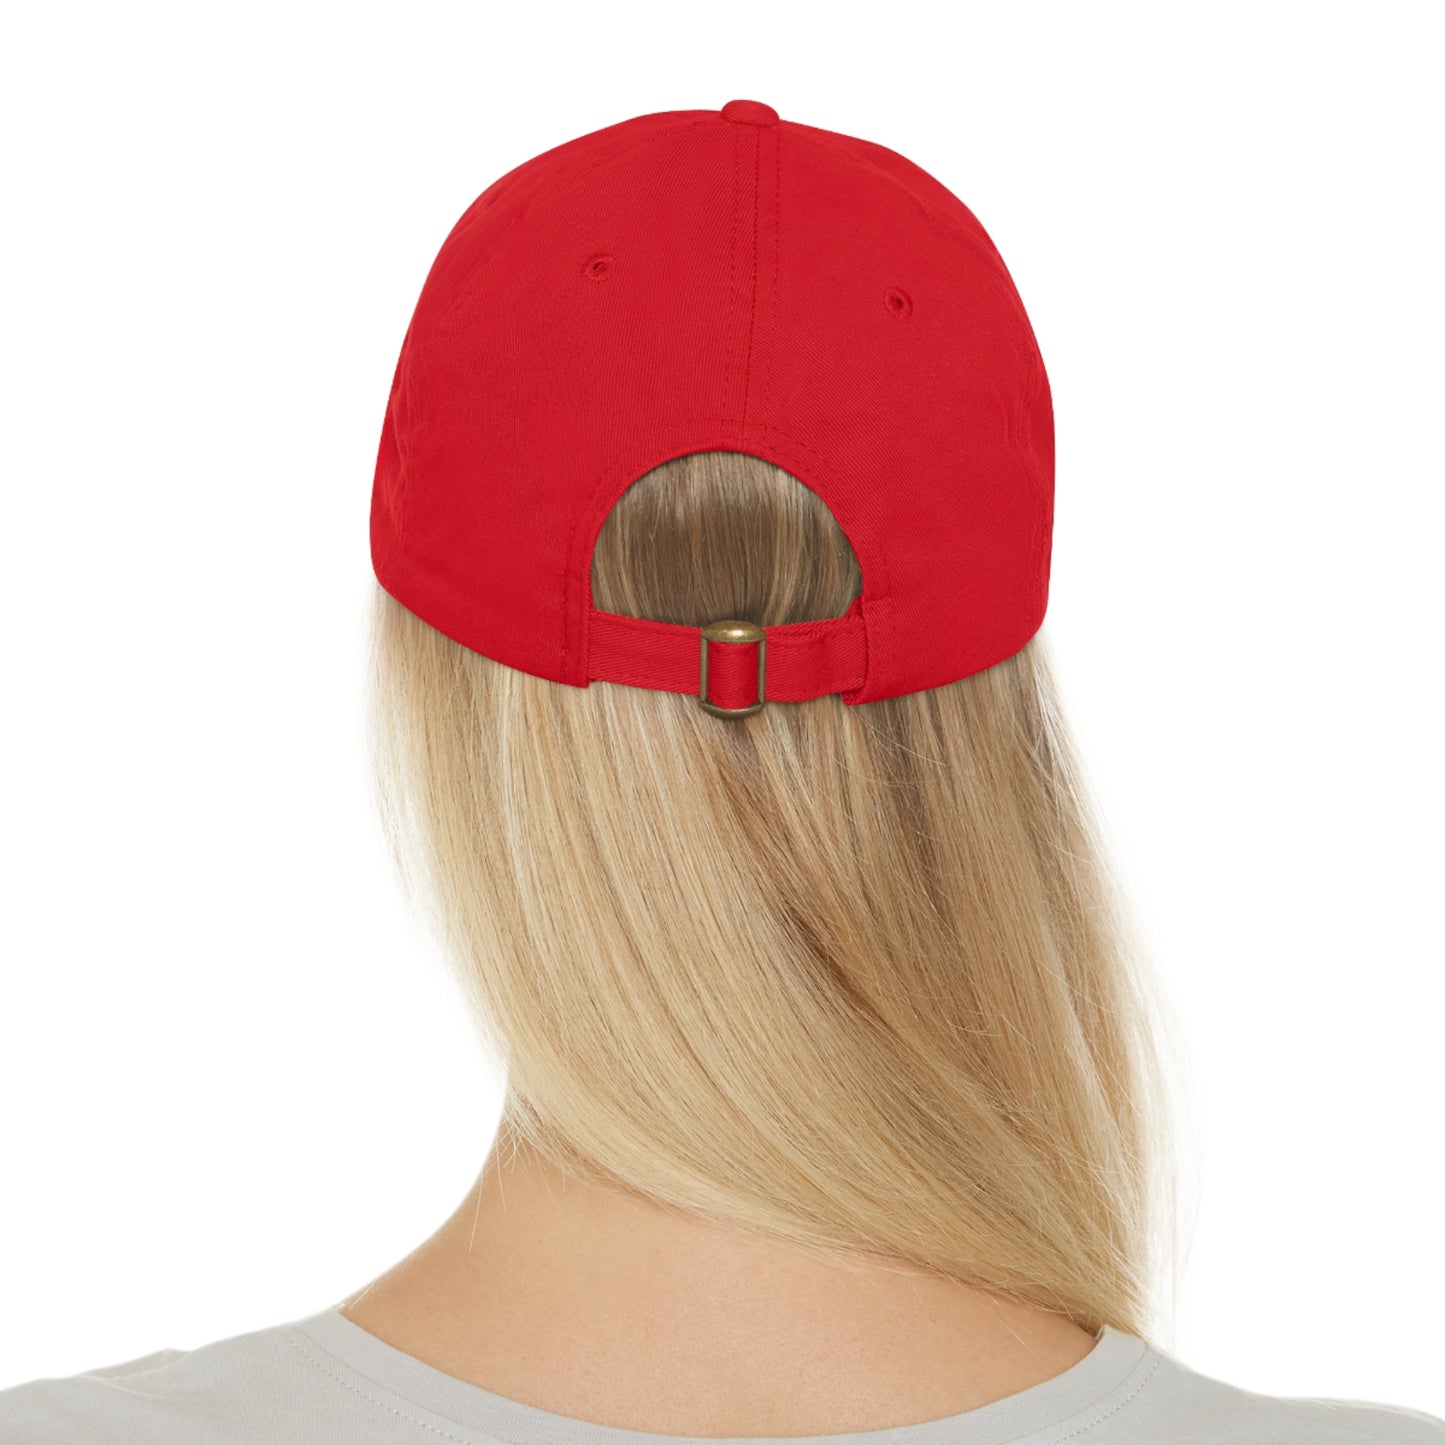 Camp SoberFest Dad Hat with Leather Patch (Round)